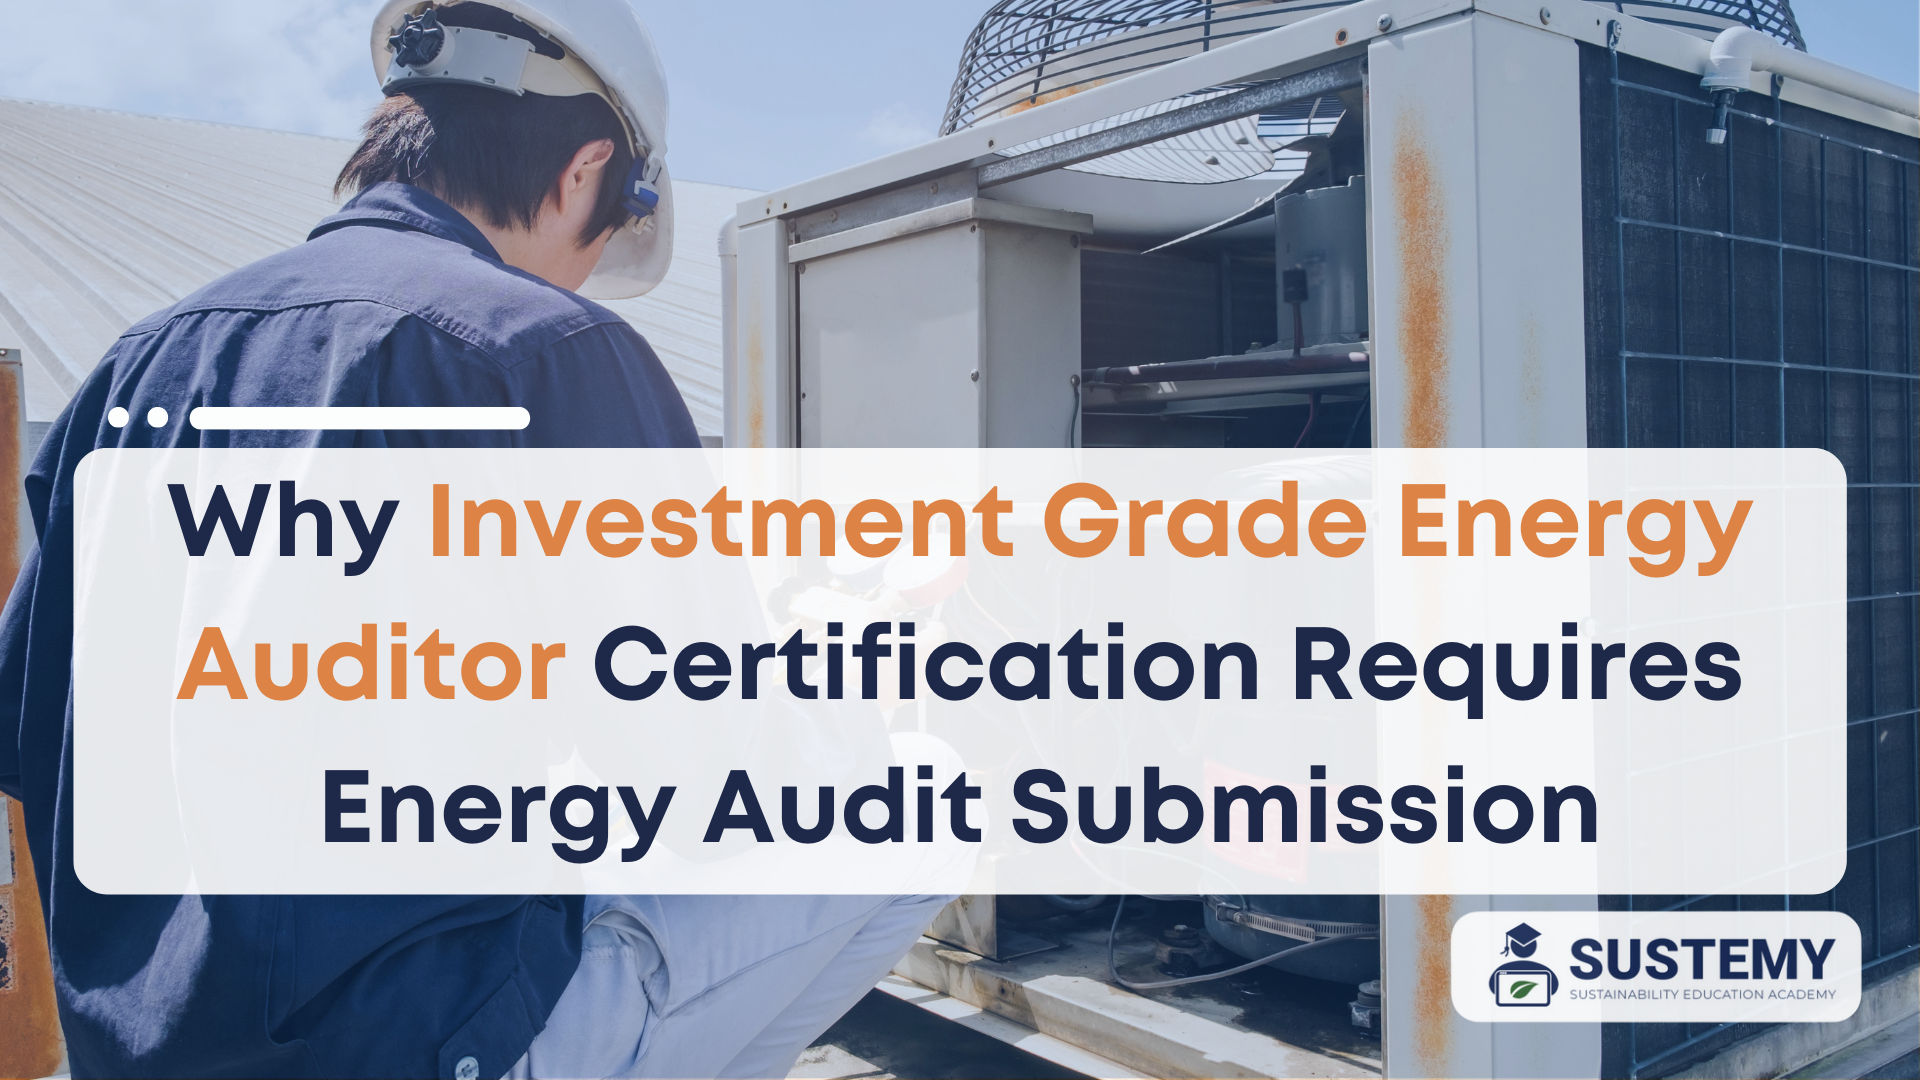 Why IGEA certification requires energy audit submission